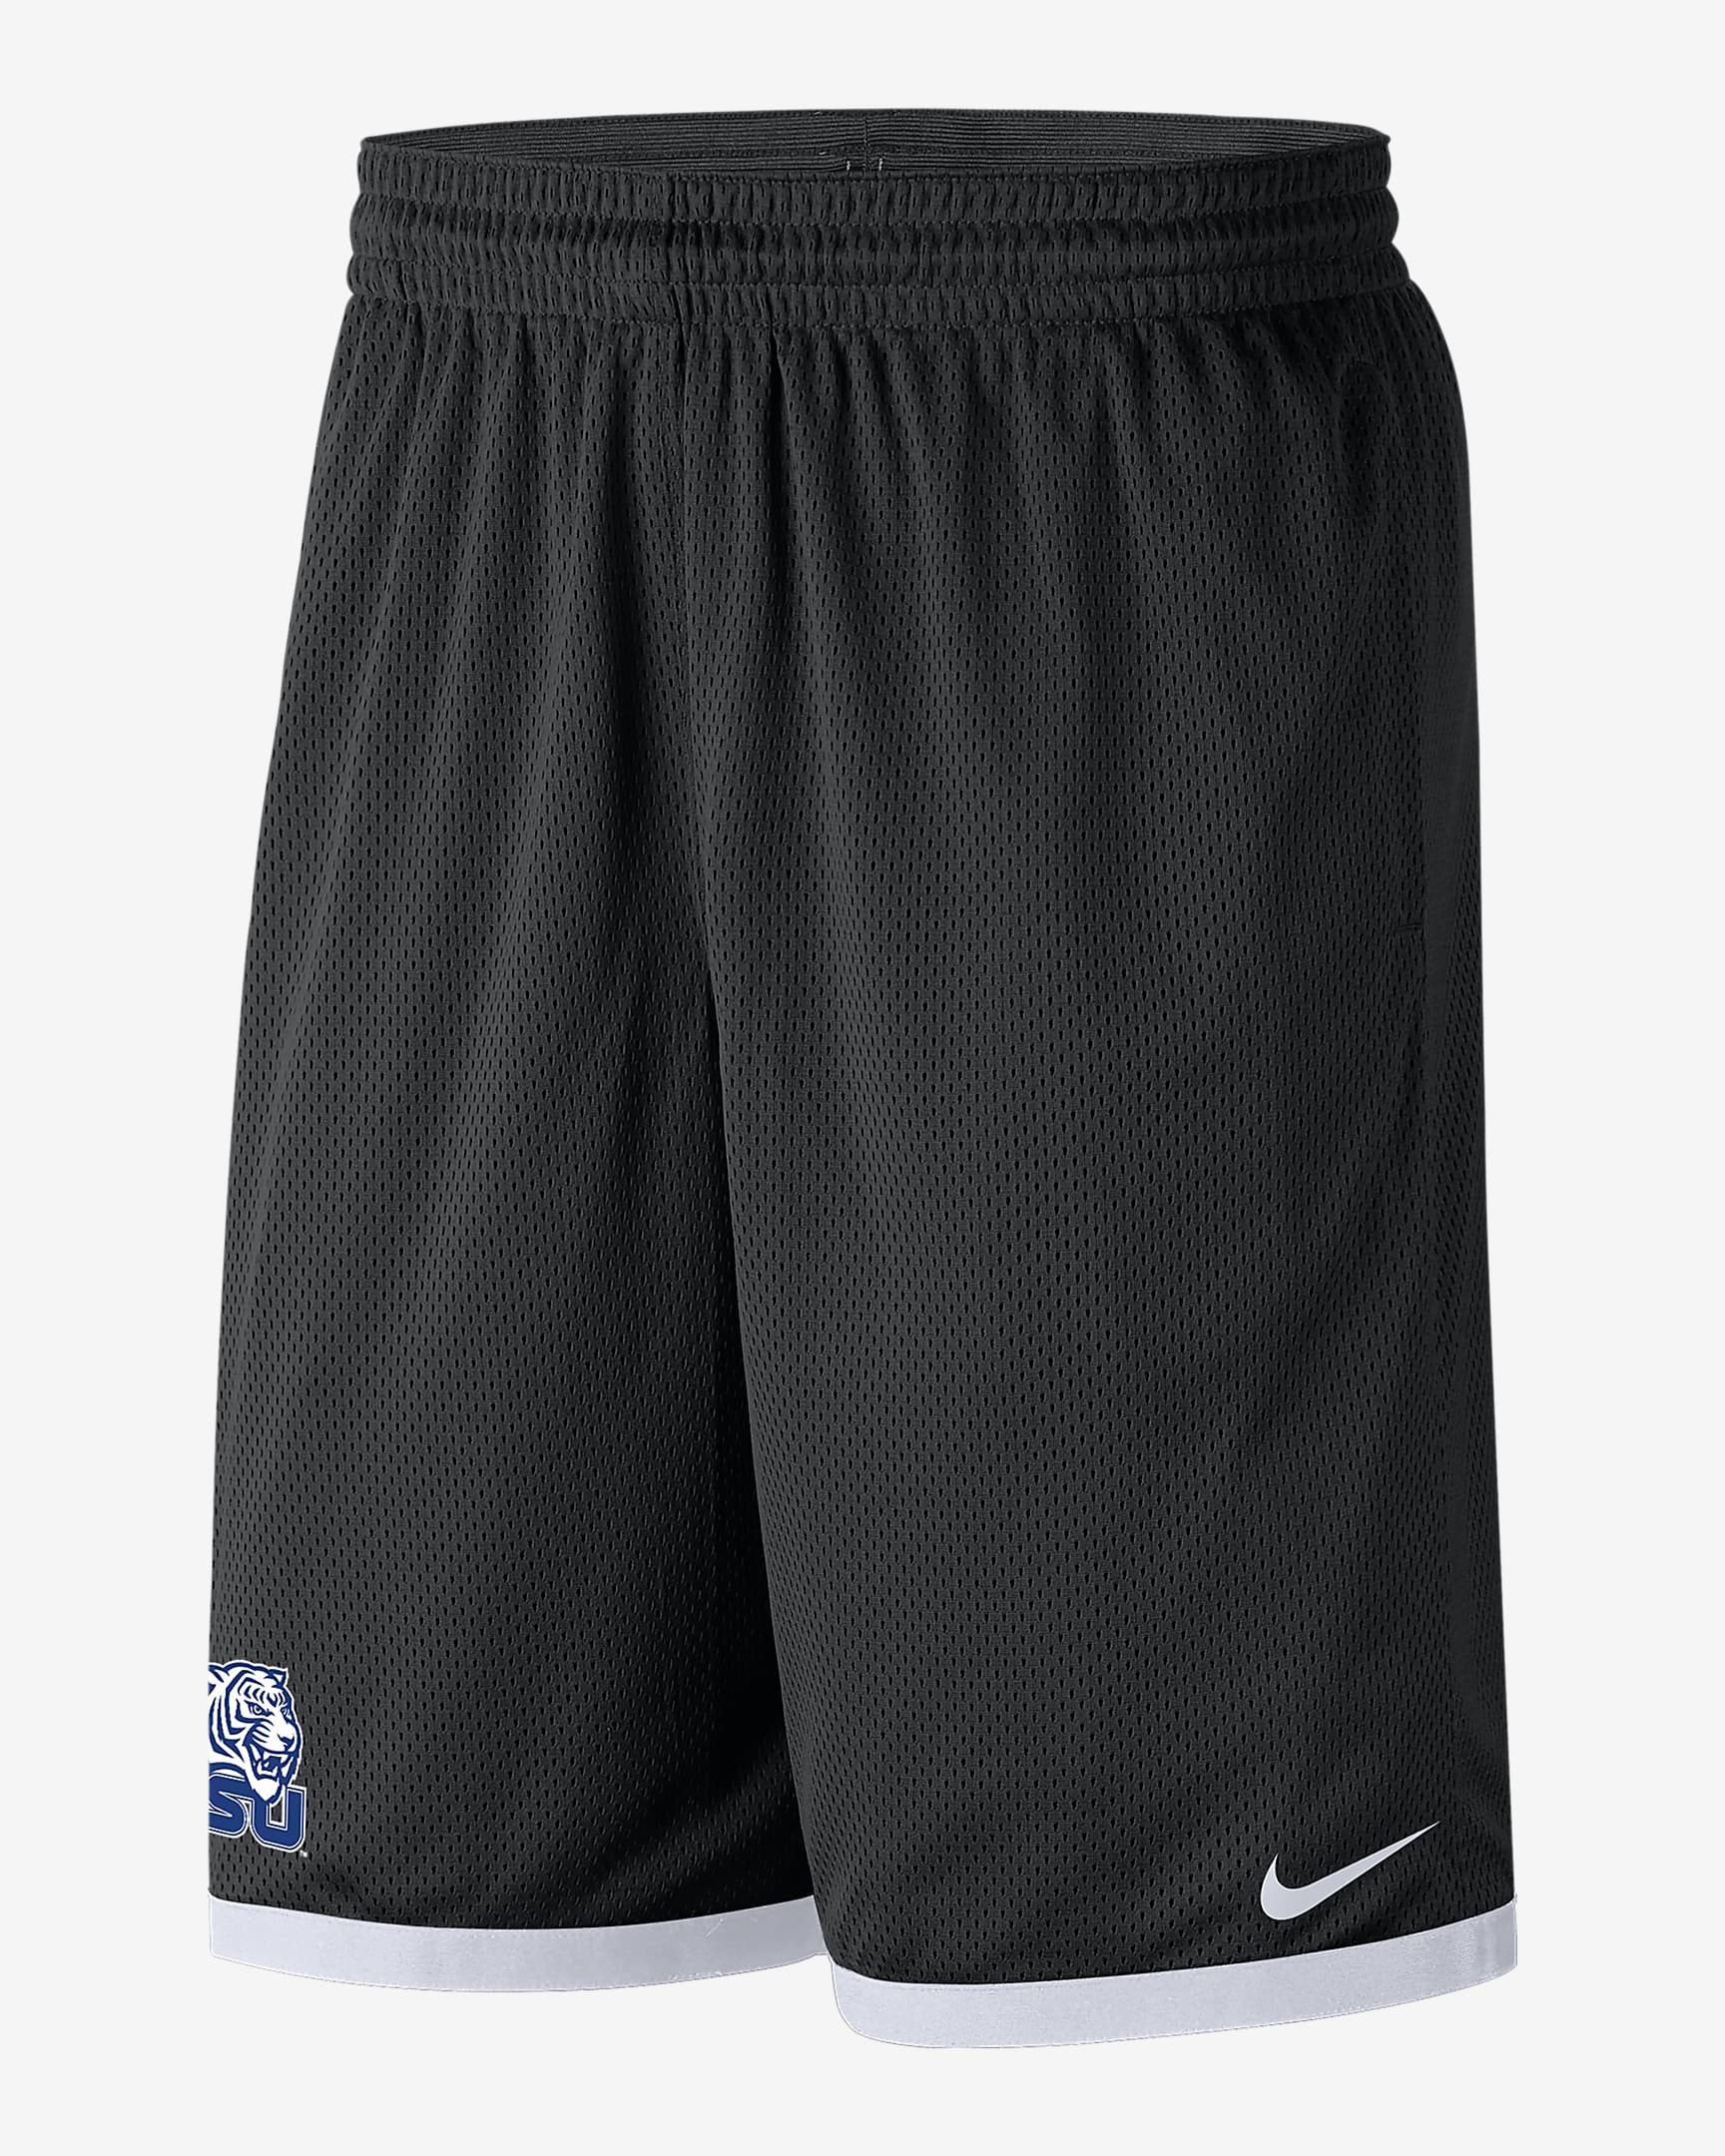 Tennessee State Men's Nike College Mesh Shorts. Nike.com